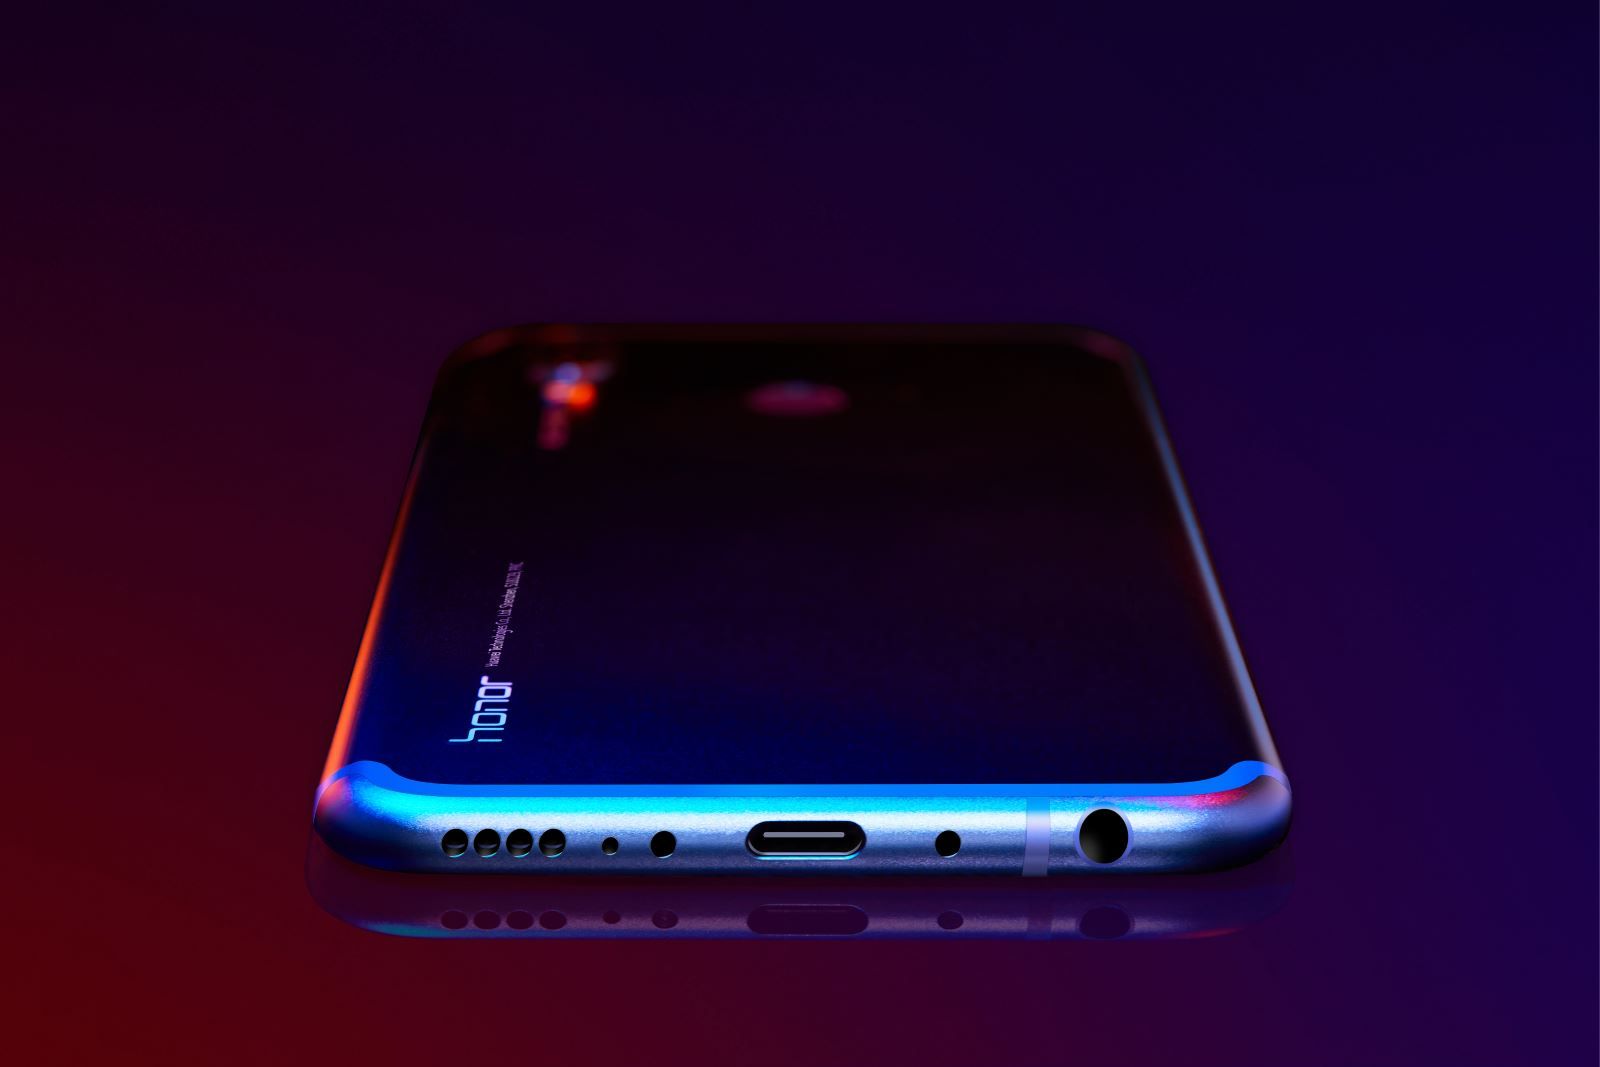 Honors gaming phone is here behold the Honor Play image 2